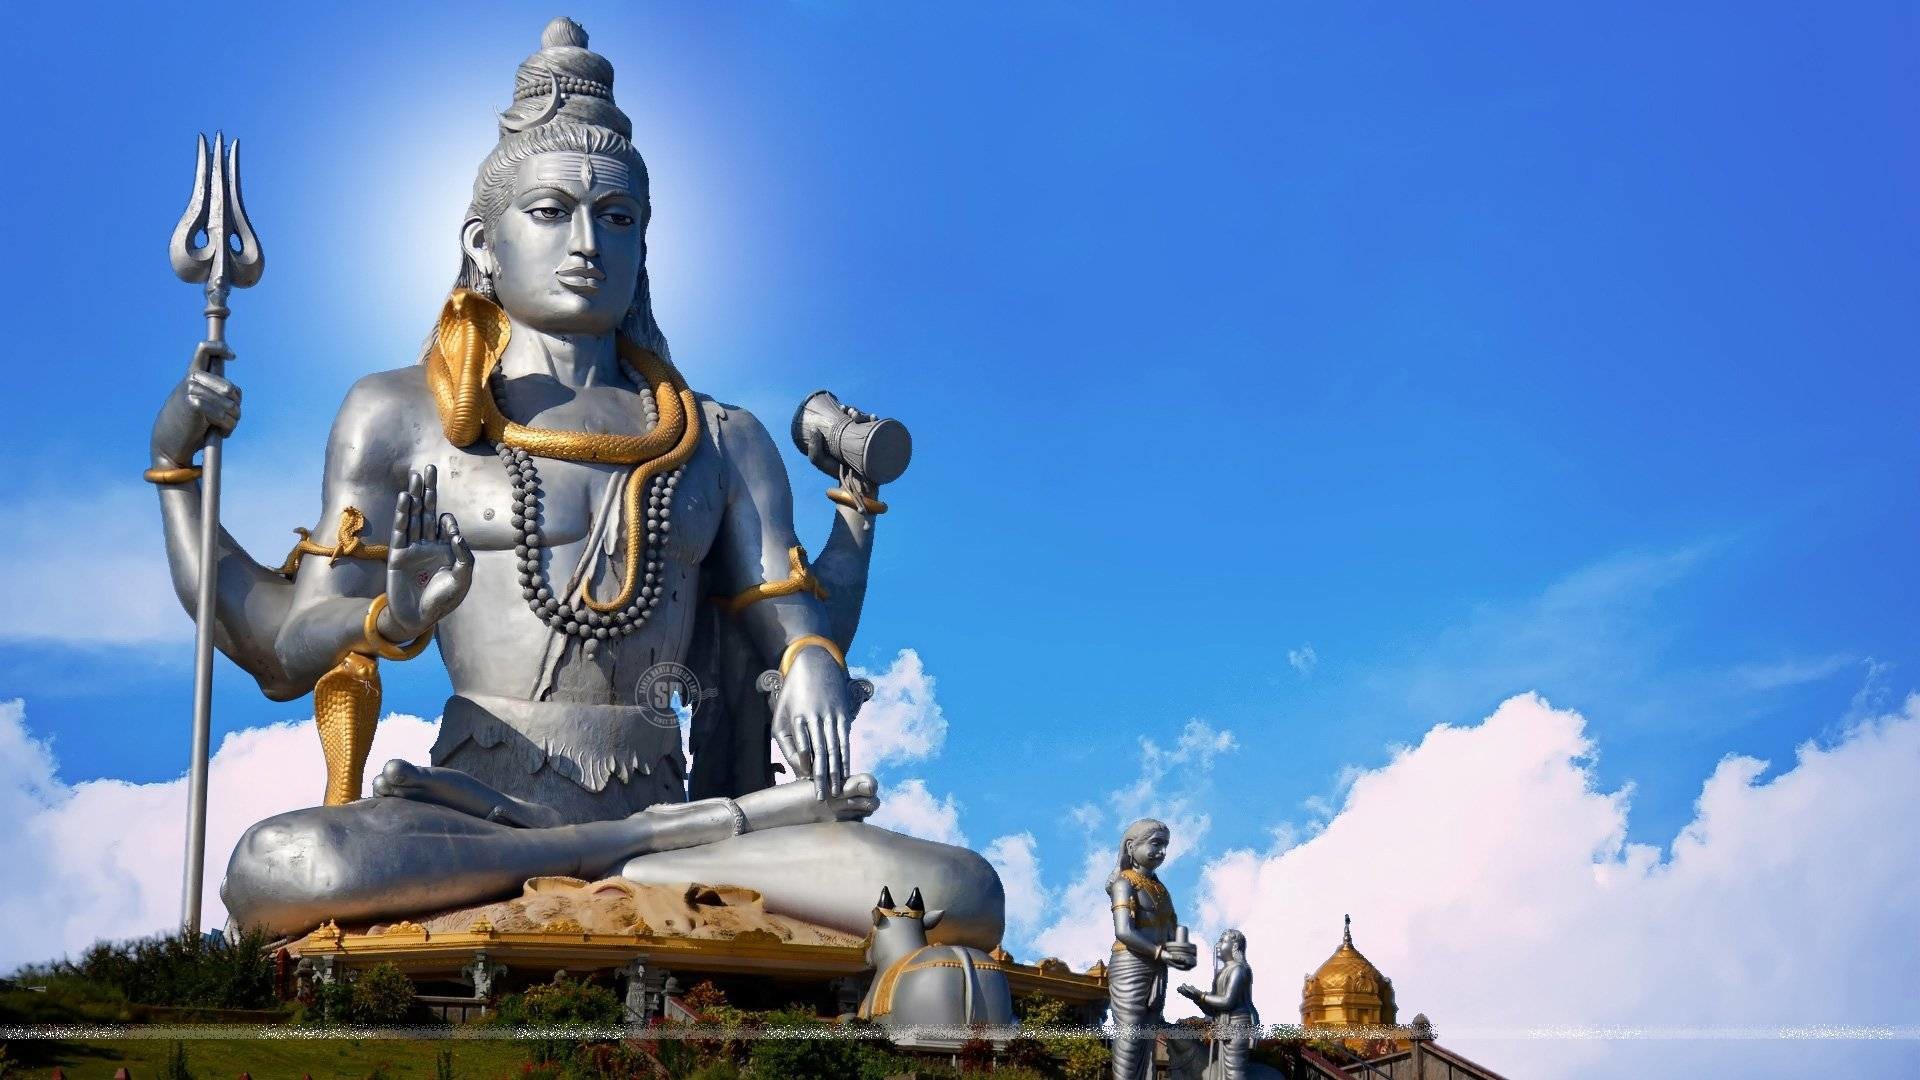 tamil movies hd wallpapers 1080p,landmark,statue,temple,sculpture,place of worship